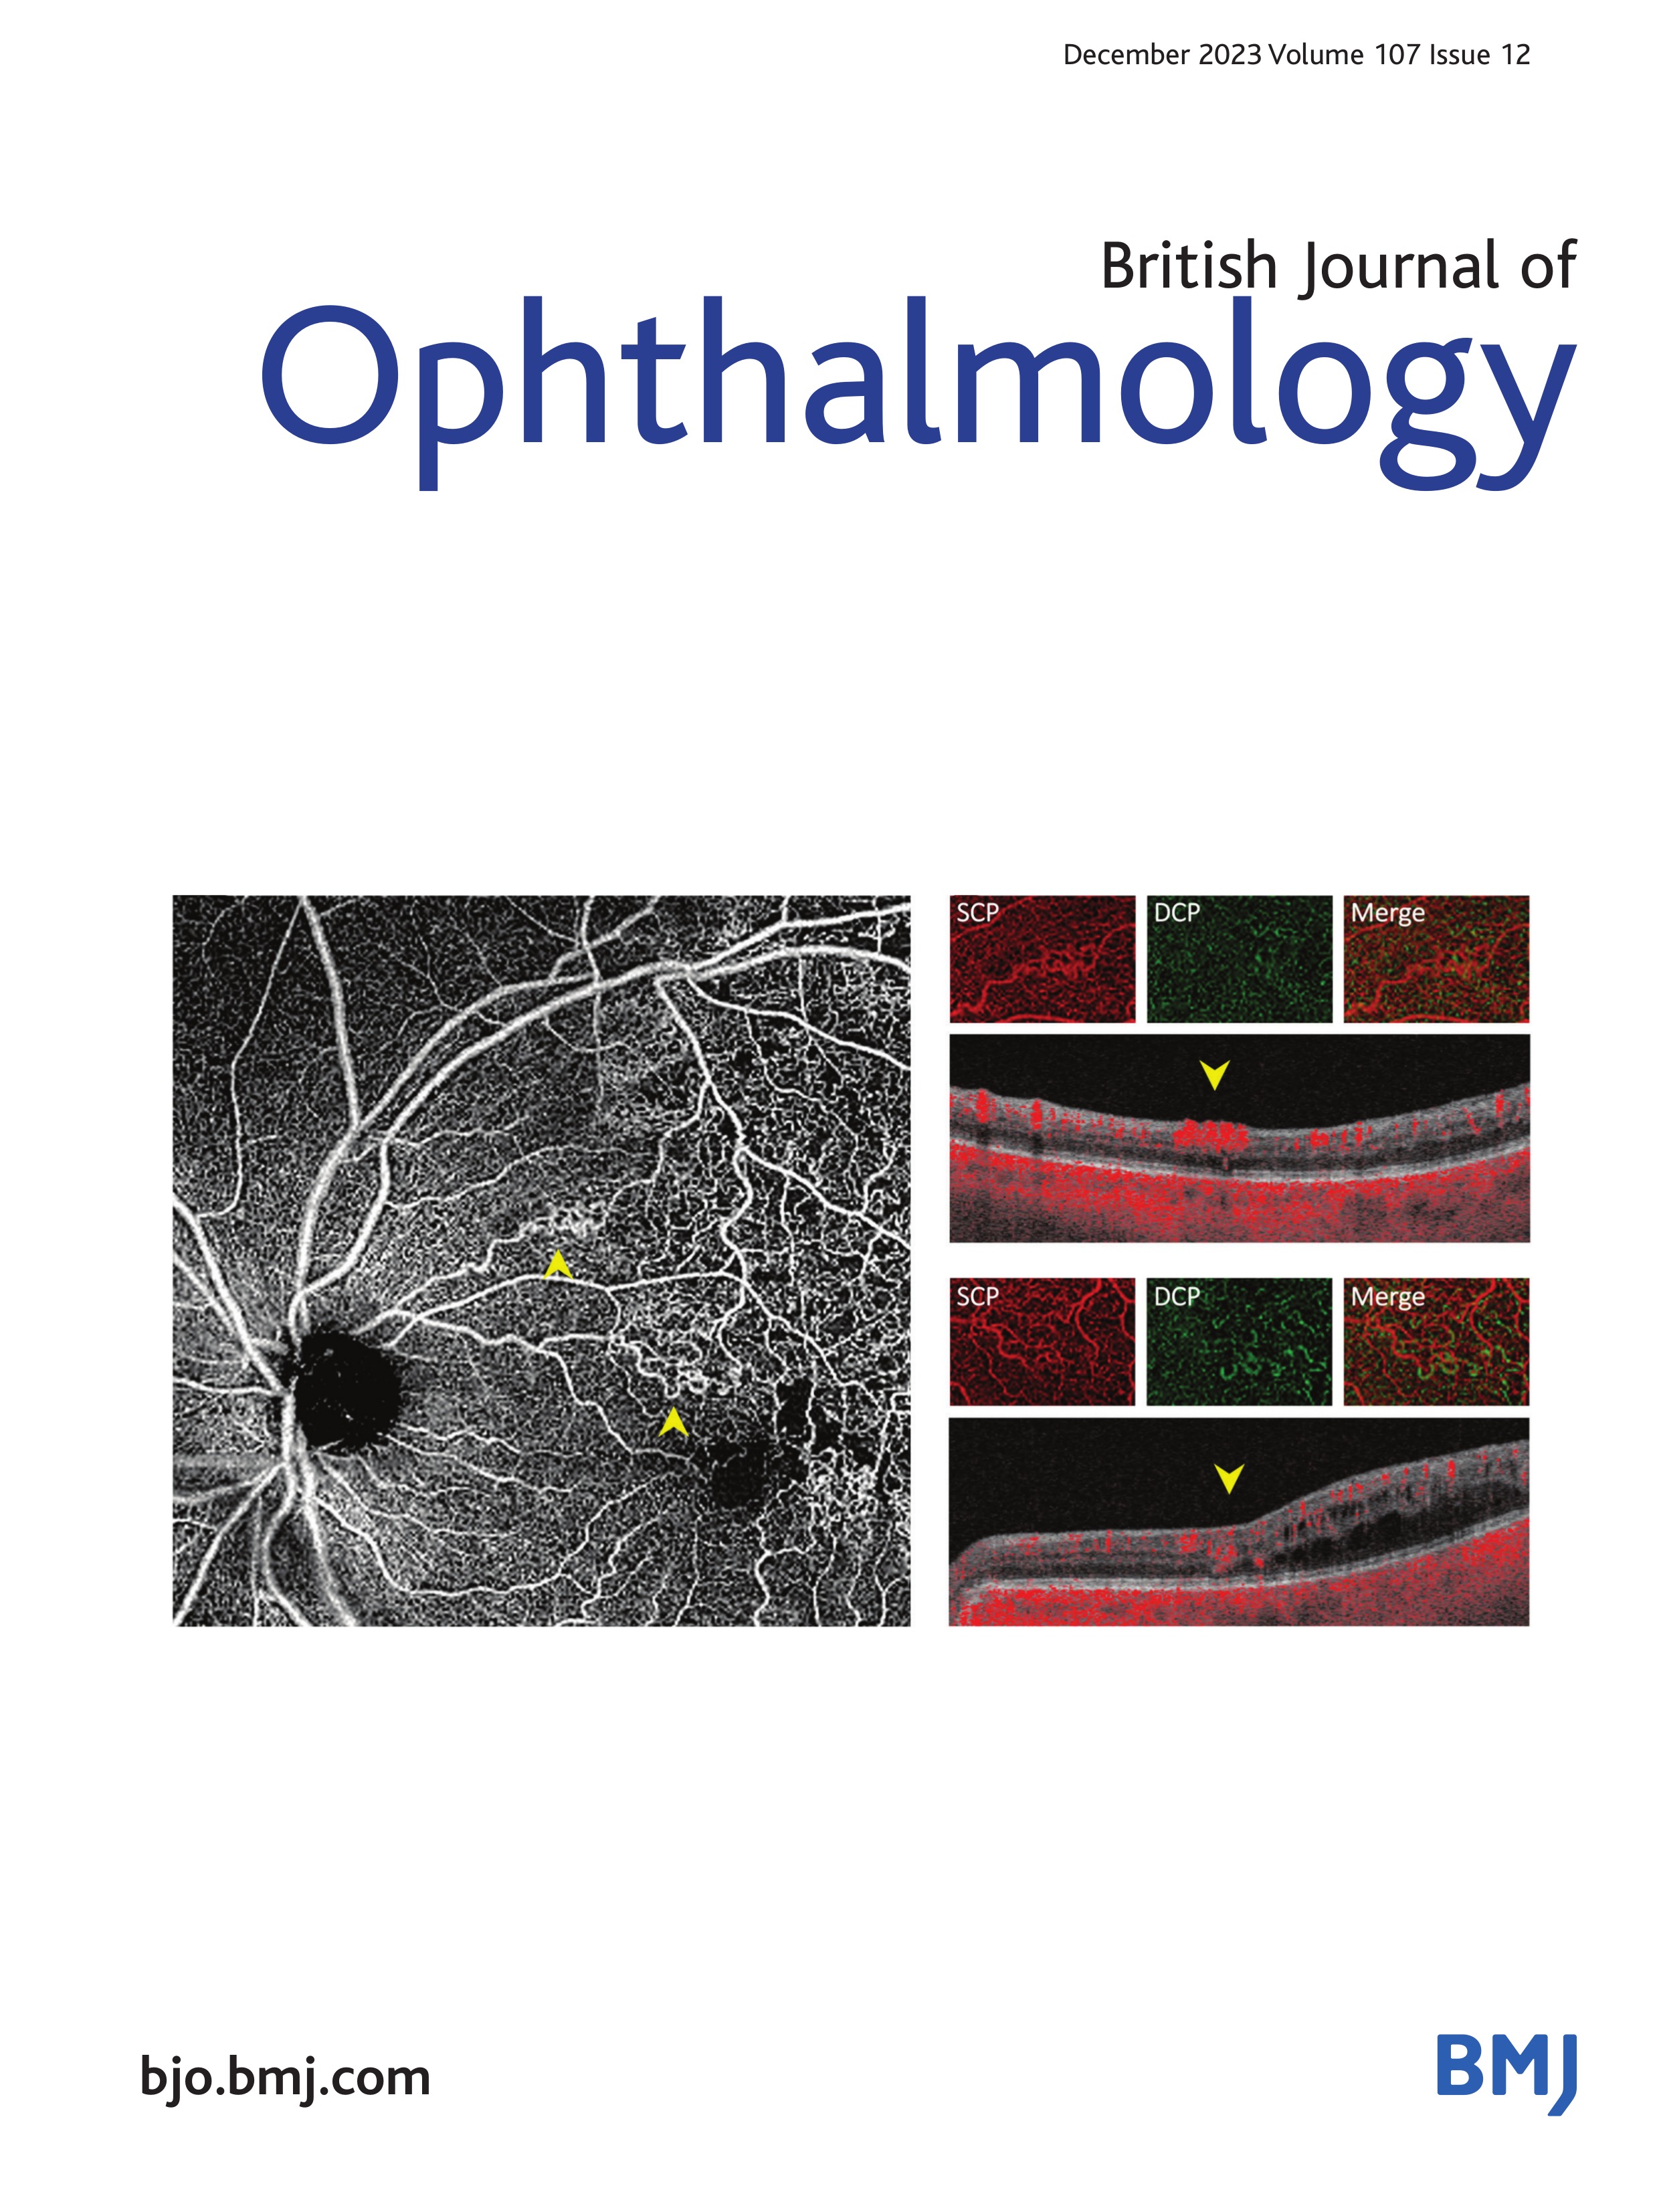 Automatic interpretation and clinical evaluation for fundus fluorescein angiography images of diabetic retinopathy patients by deep learning